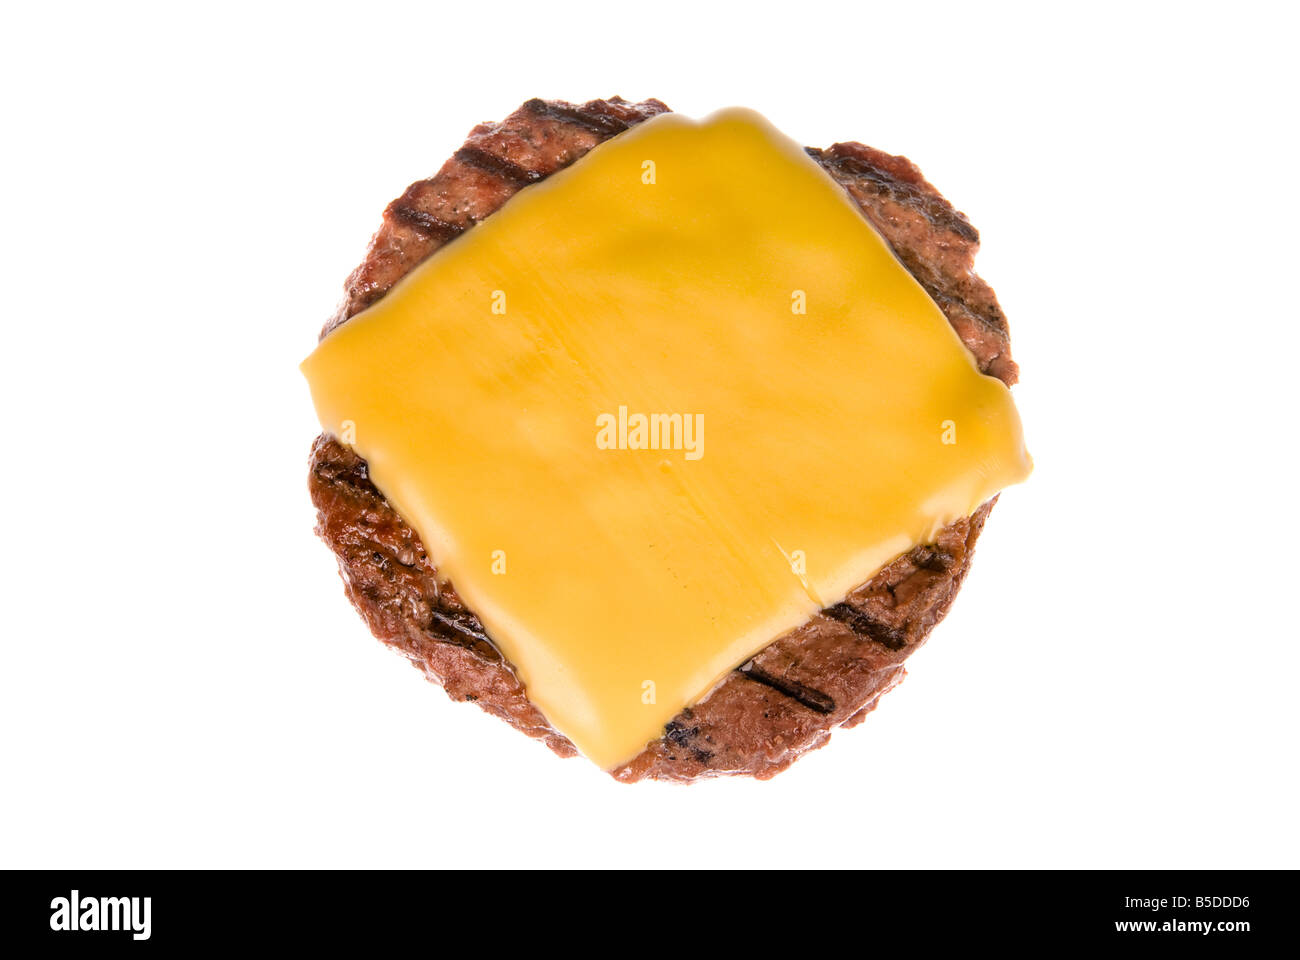 A thick juicy hamburger patty with a melted slice of cheese freshly cooked on a barbecue and isolated on white Stock Photo